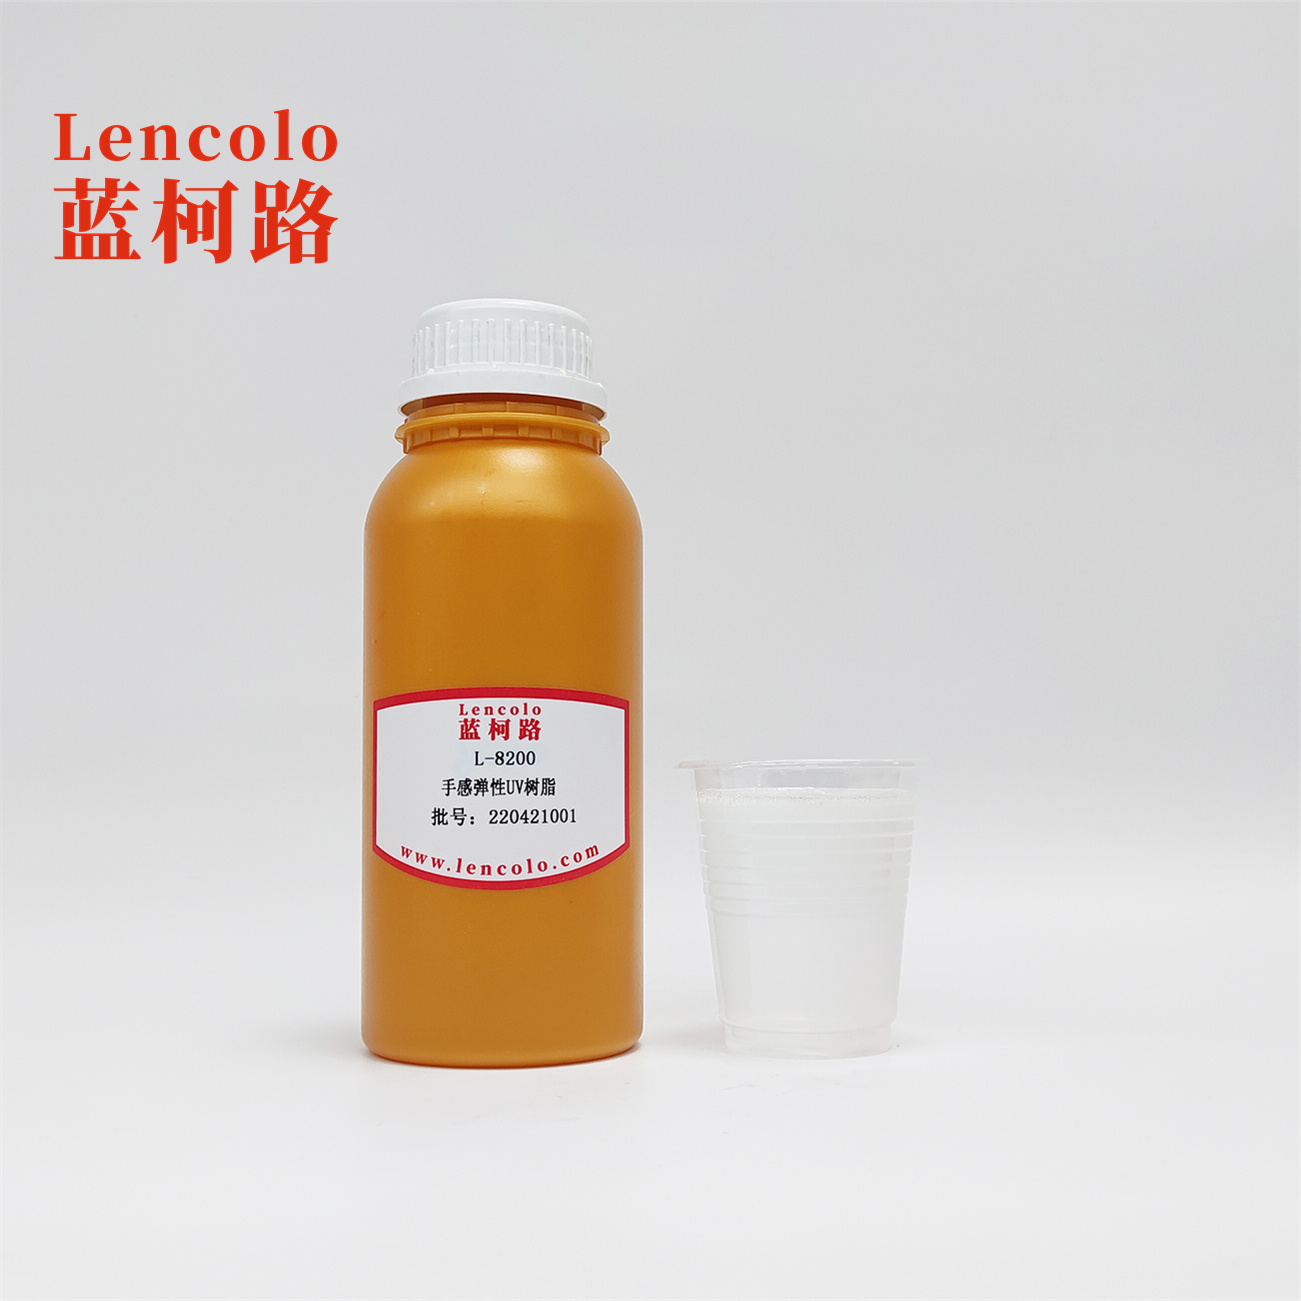 L-8200 Soft Touch Elastic UV curing Resin for peelable inks